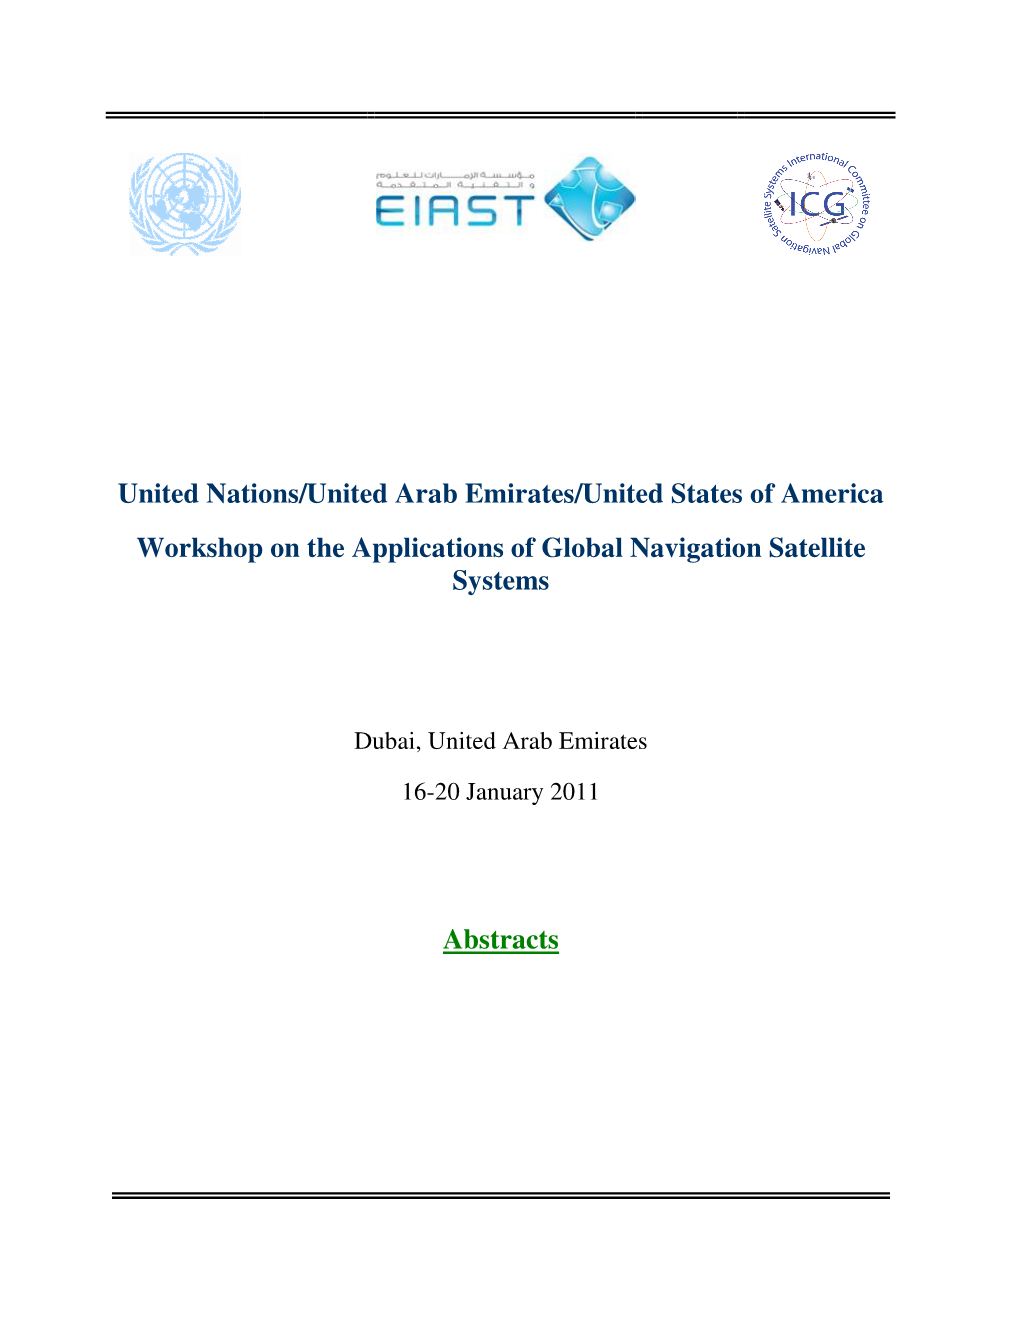 United Nations/United Arab Emirates/United States of America Workshop on the Applications of Global Navigation Satellite Systems